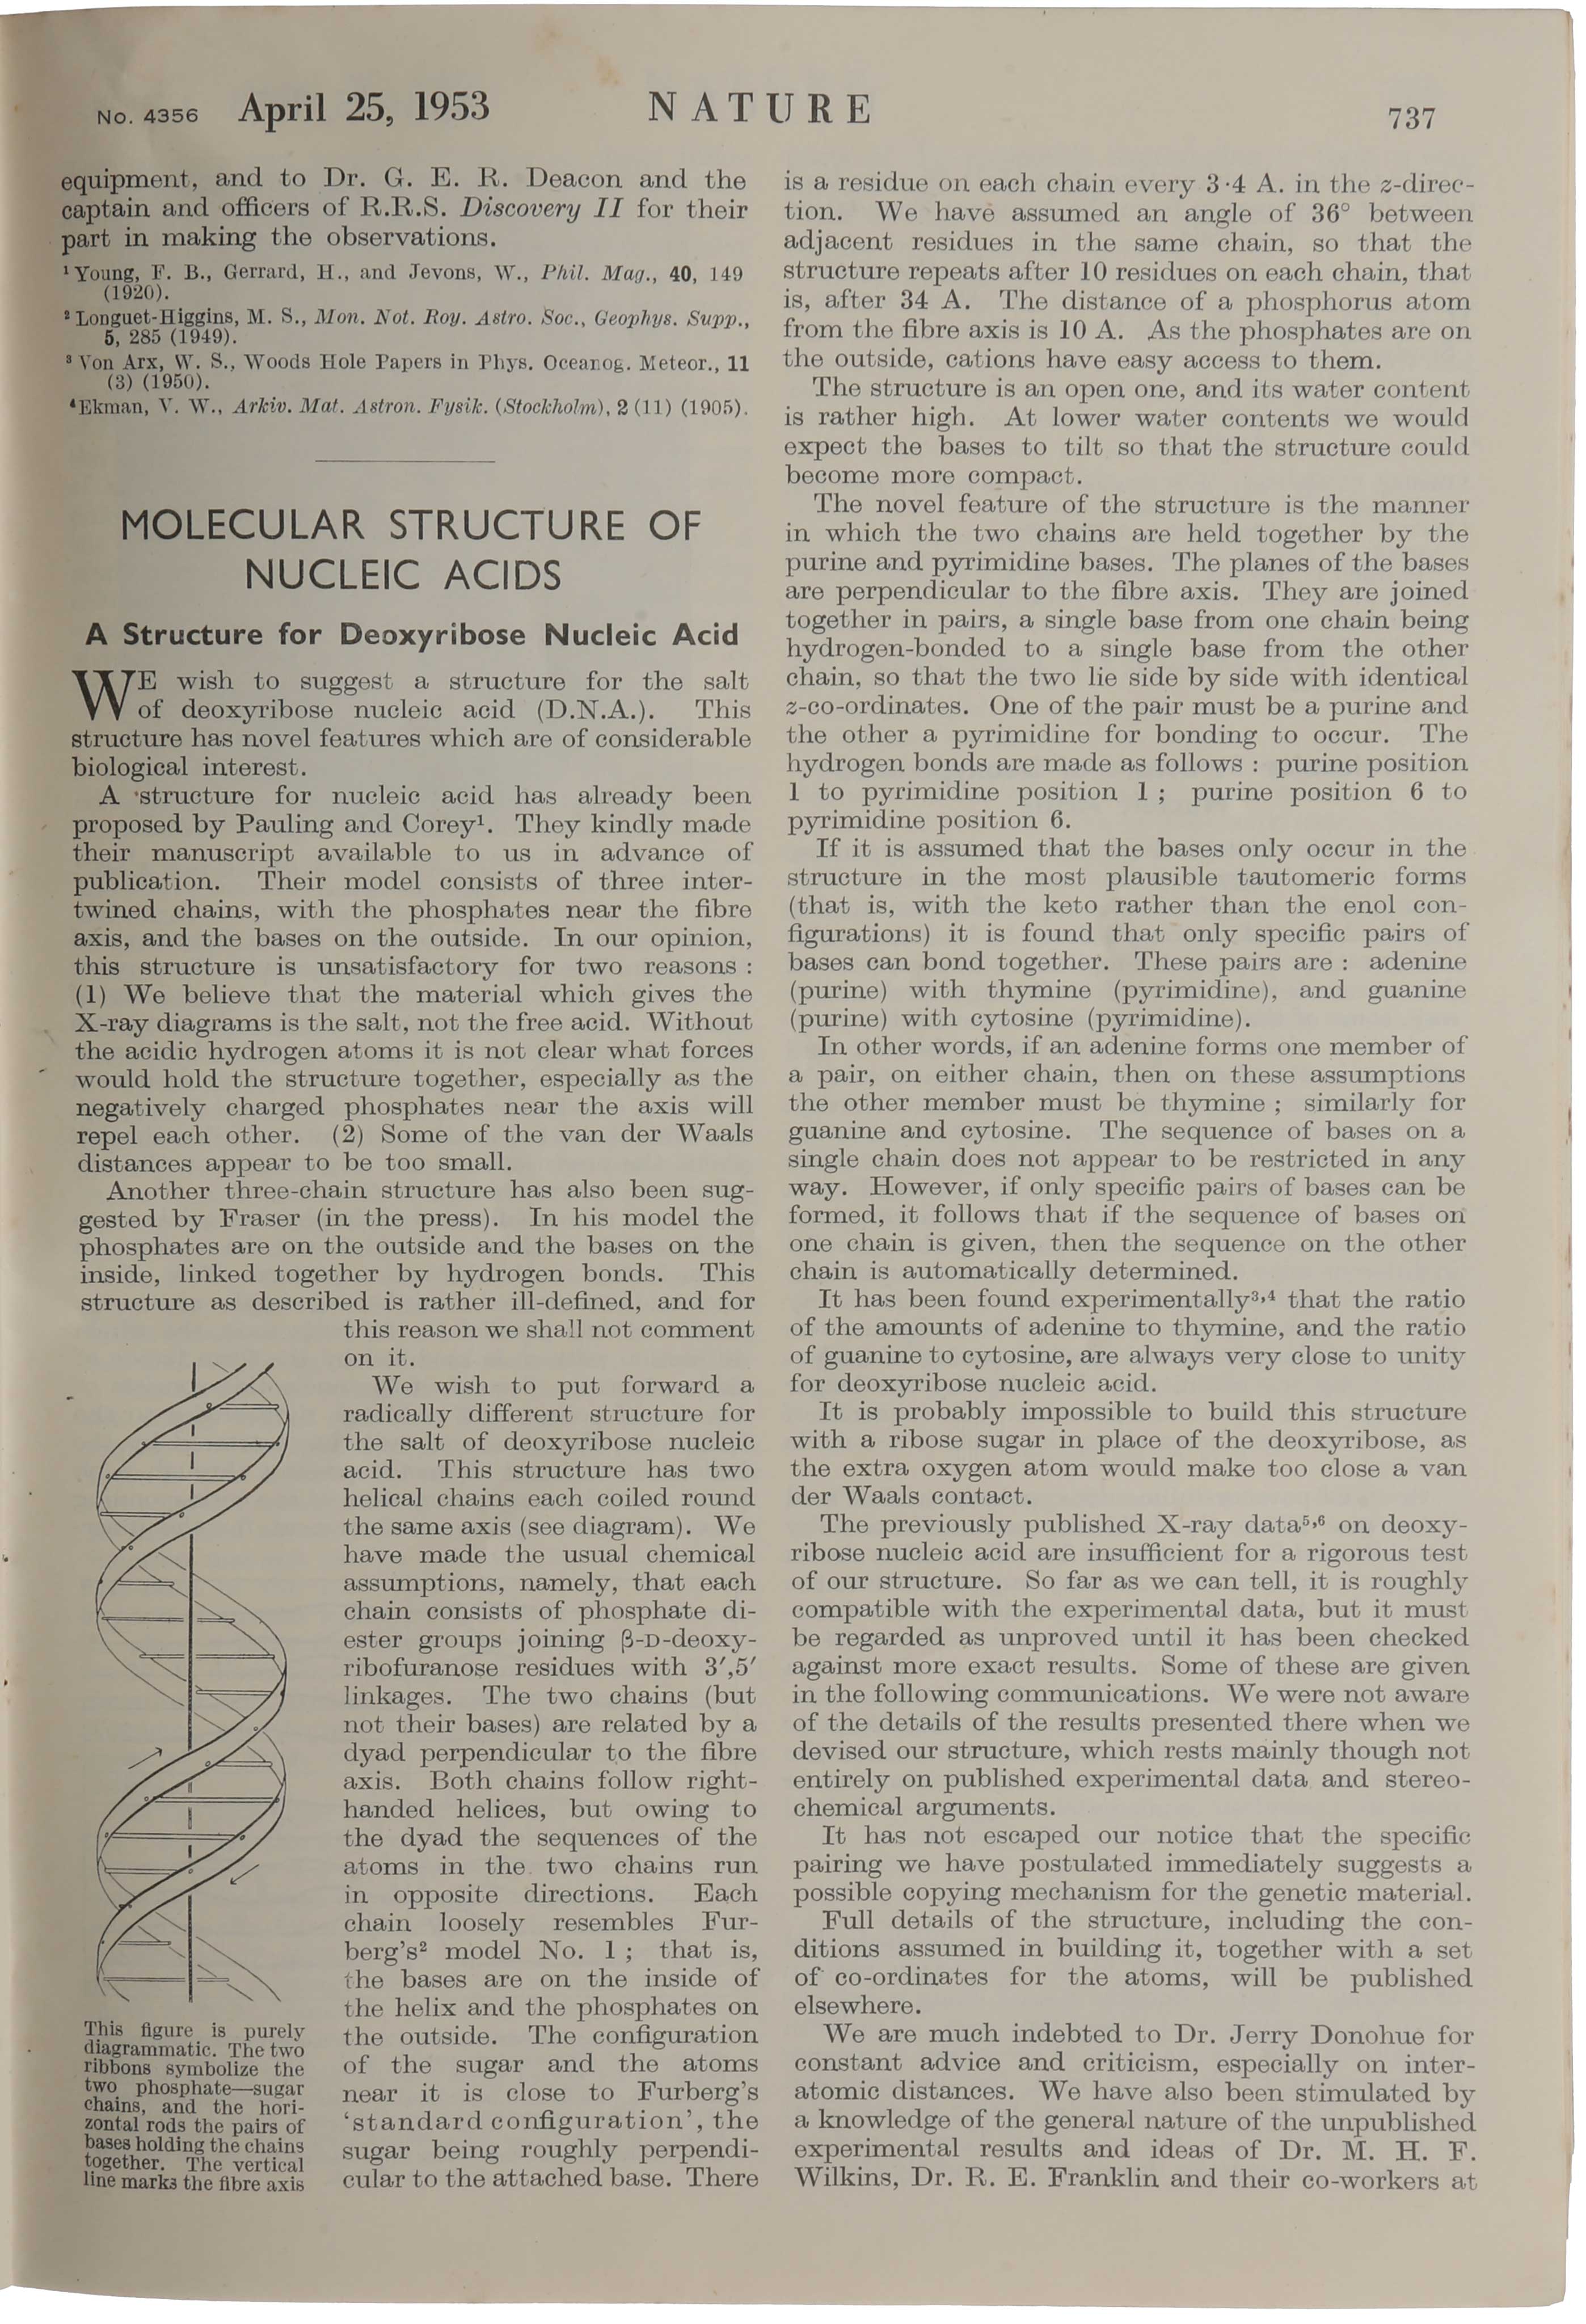 Item #4407 [The six milestone papers on the structure of DNA in original wrappers:] 1. WATSON, J. D. & CRICK, F. H. C. Molecular Structure of Nucleic Acids: A Structure for Deoxyribose Nucleic Acid; 2. WILKINS, M. H. F., STOKES, A. R. & WILSON, H. R. Molecular Structure of Deoxypentose Nucleic Acids; 3. FRANKLIN, R. E. & GOSLING, R. G. Molecular Configuration in Sodium Thymonucleate, pp. 737-41 in Nature, Vol. 171, No. 4356, April 25, 1953. 4. WATSON, J. D. & CRICK, F. H. C. Genetical Implications of the Structure of Deoxyribonucleic Acid, pp. 964-7 in Nature, Vol. 171, No. 4361, May 30, 1953. 5. FRANKLIN, R. E. & GOSLING, R. G. Evidence for 2-Chain Helix in Crystalline Structure of Sodium Deoxyribonucleate, pp. 156-7 in Nature, Vol. 172, No. 4369, July 25, 1953. 6. WILKINS, M. H. F., SEEDS, W. E. STOKES, A. R. & WILSON, H. R. Helical Structure of Crystalline Deoxypentose Nucleic Acid, pp. 759-62 in Nature, Vol. 172, No. 4382, October 24, 1953. WATSON, CRICK, WILKINS, STOKES, WILSON, FRANKLIN, GOSLING, SEEDS.